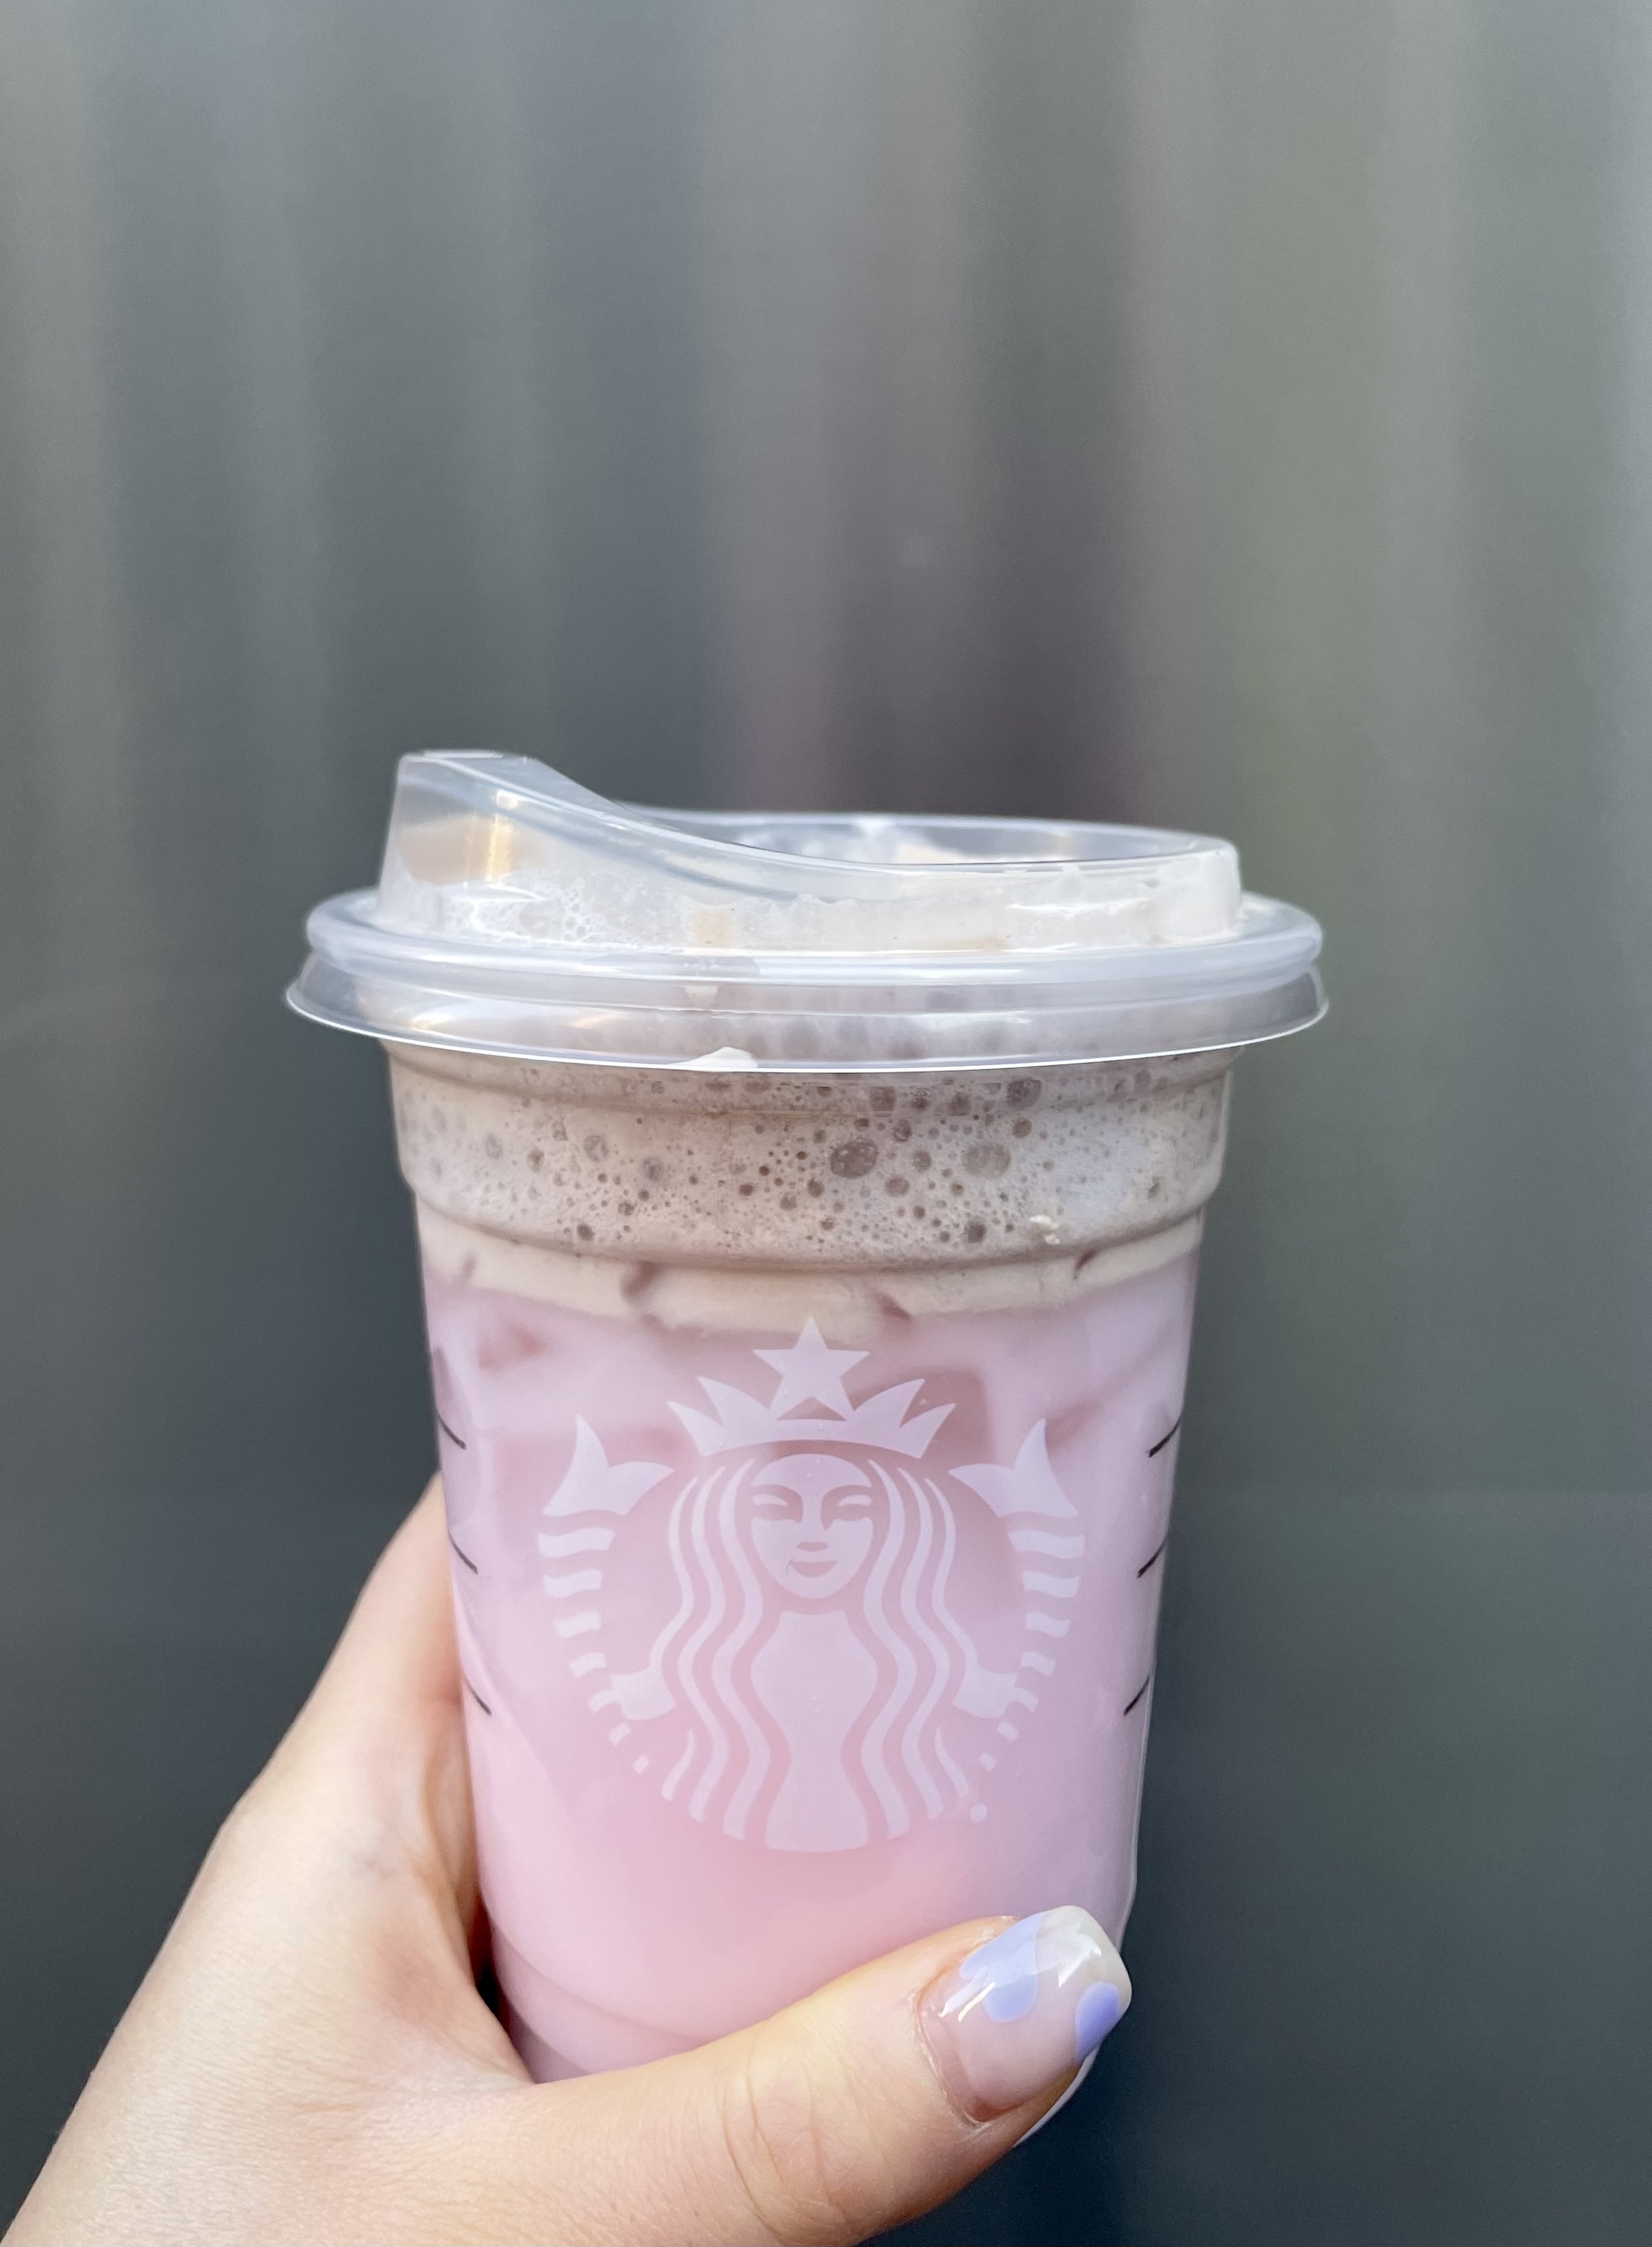 Iced Pink Drink Latte